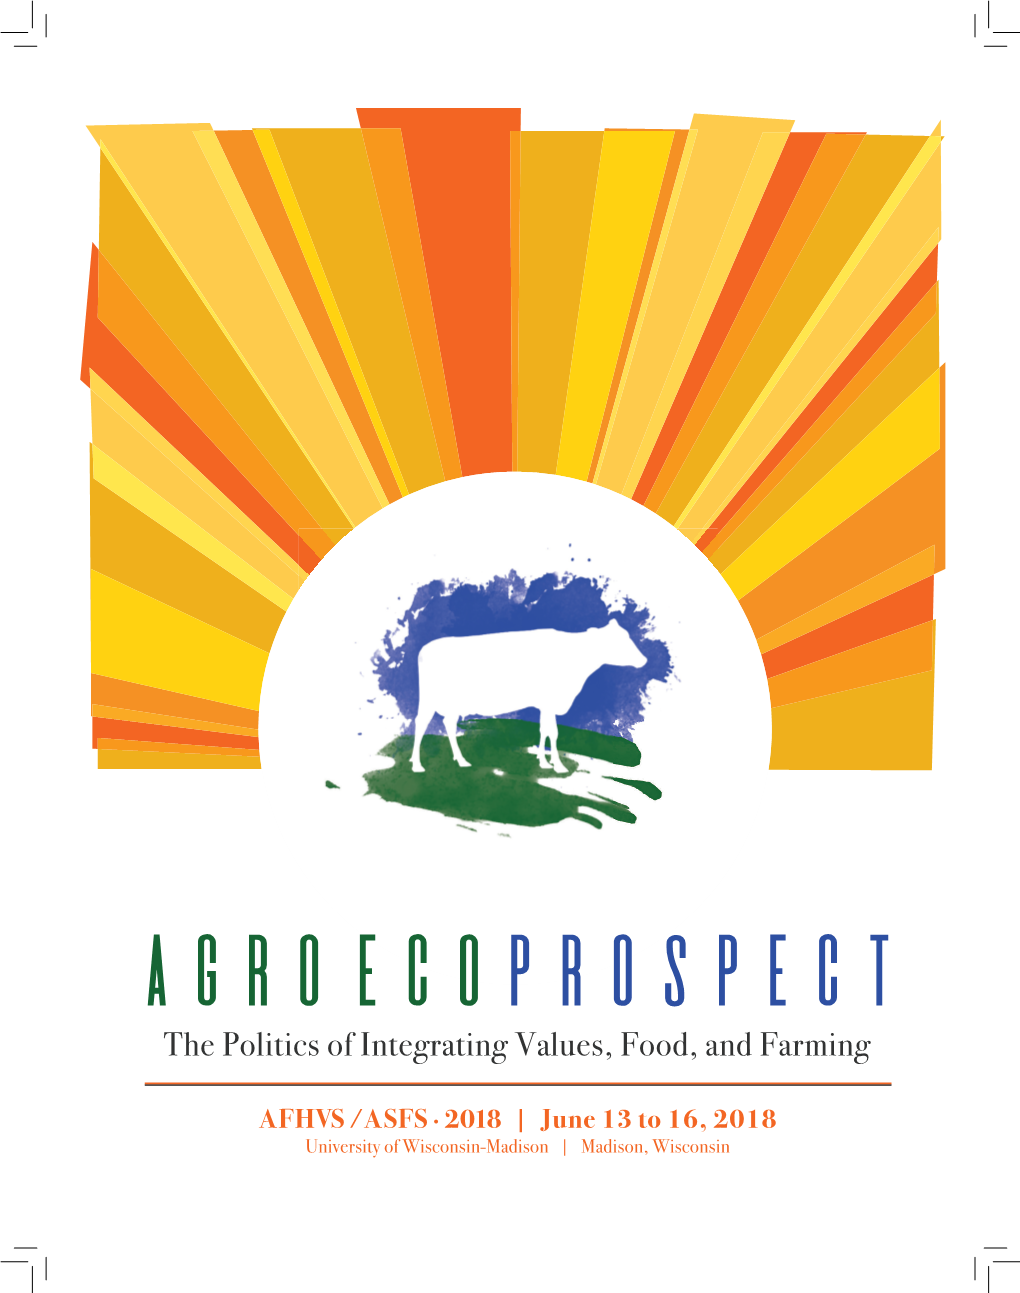 Agroecoprospect the Politics of Integrating Values, Food, and Farming